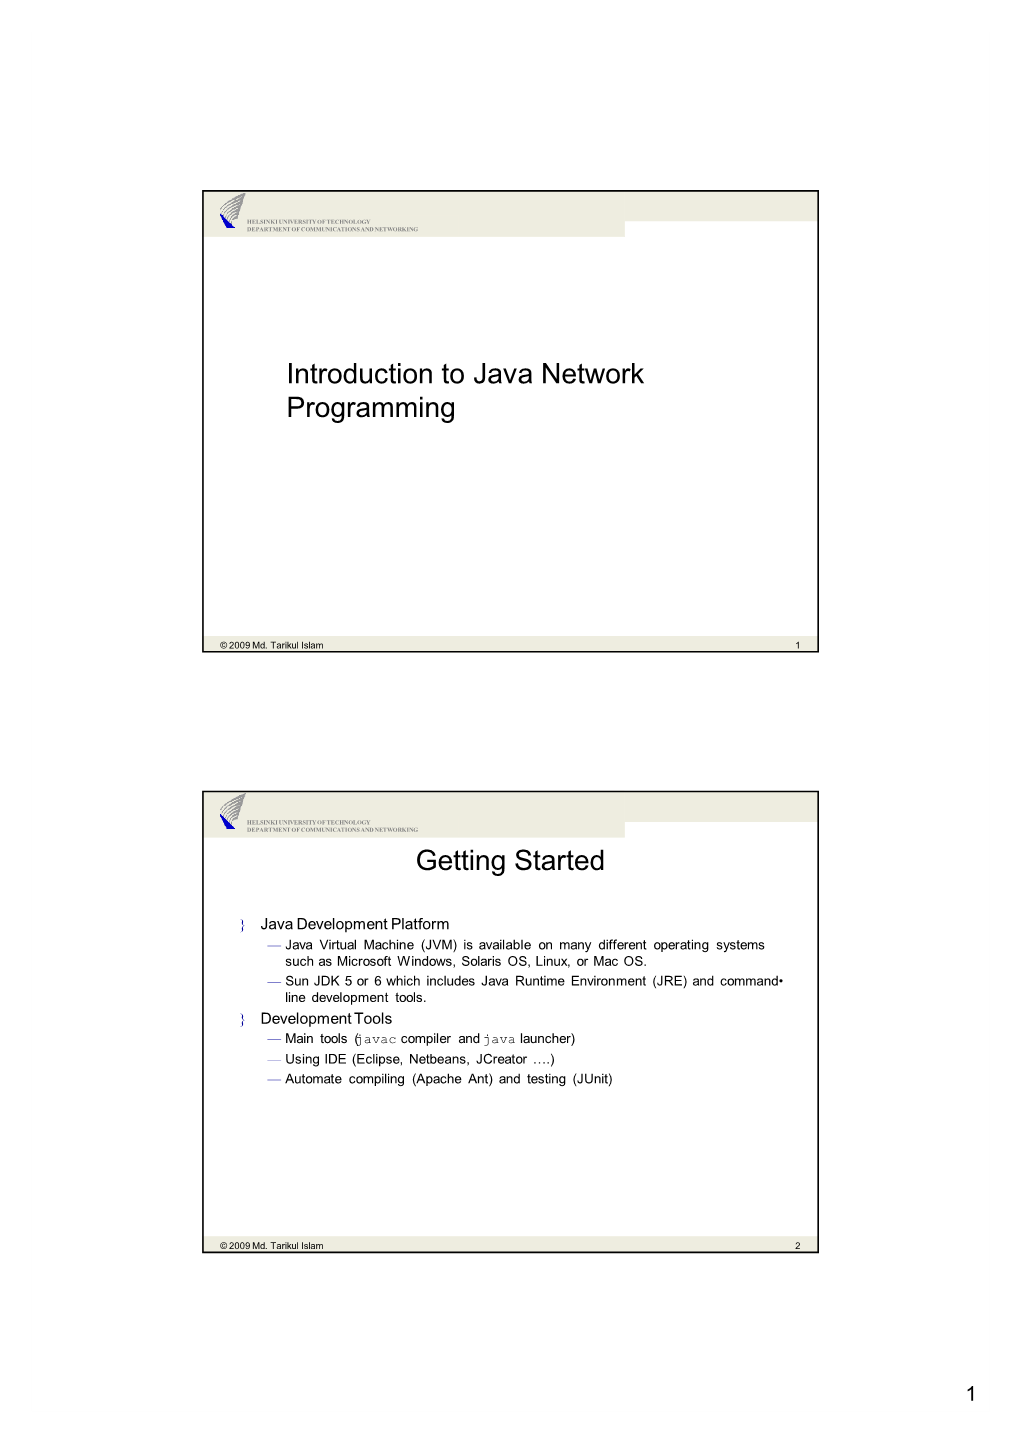 Introduction to Java Network Programming Getting Started